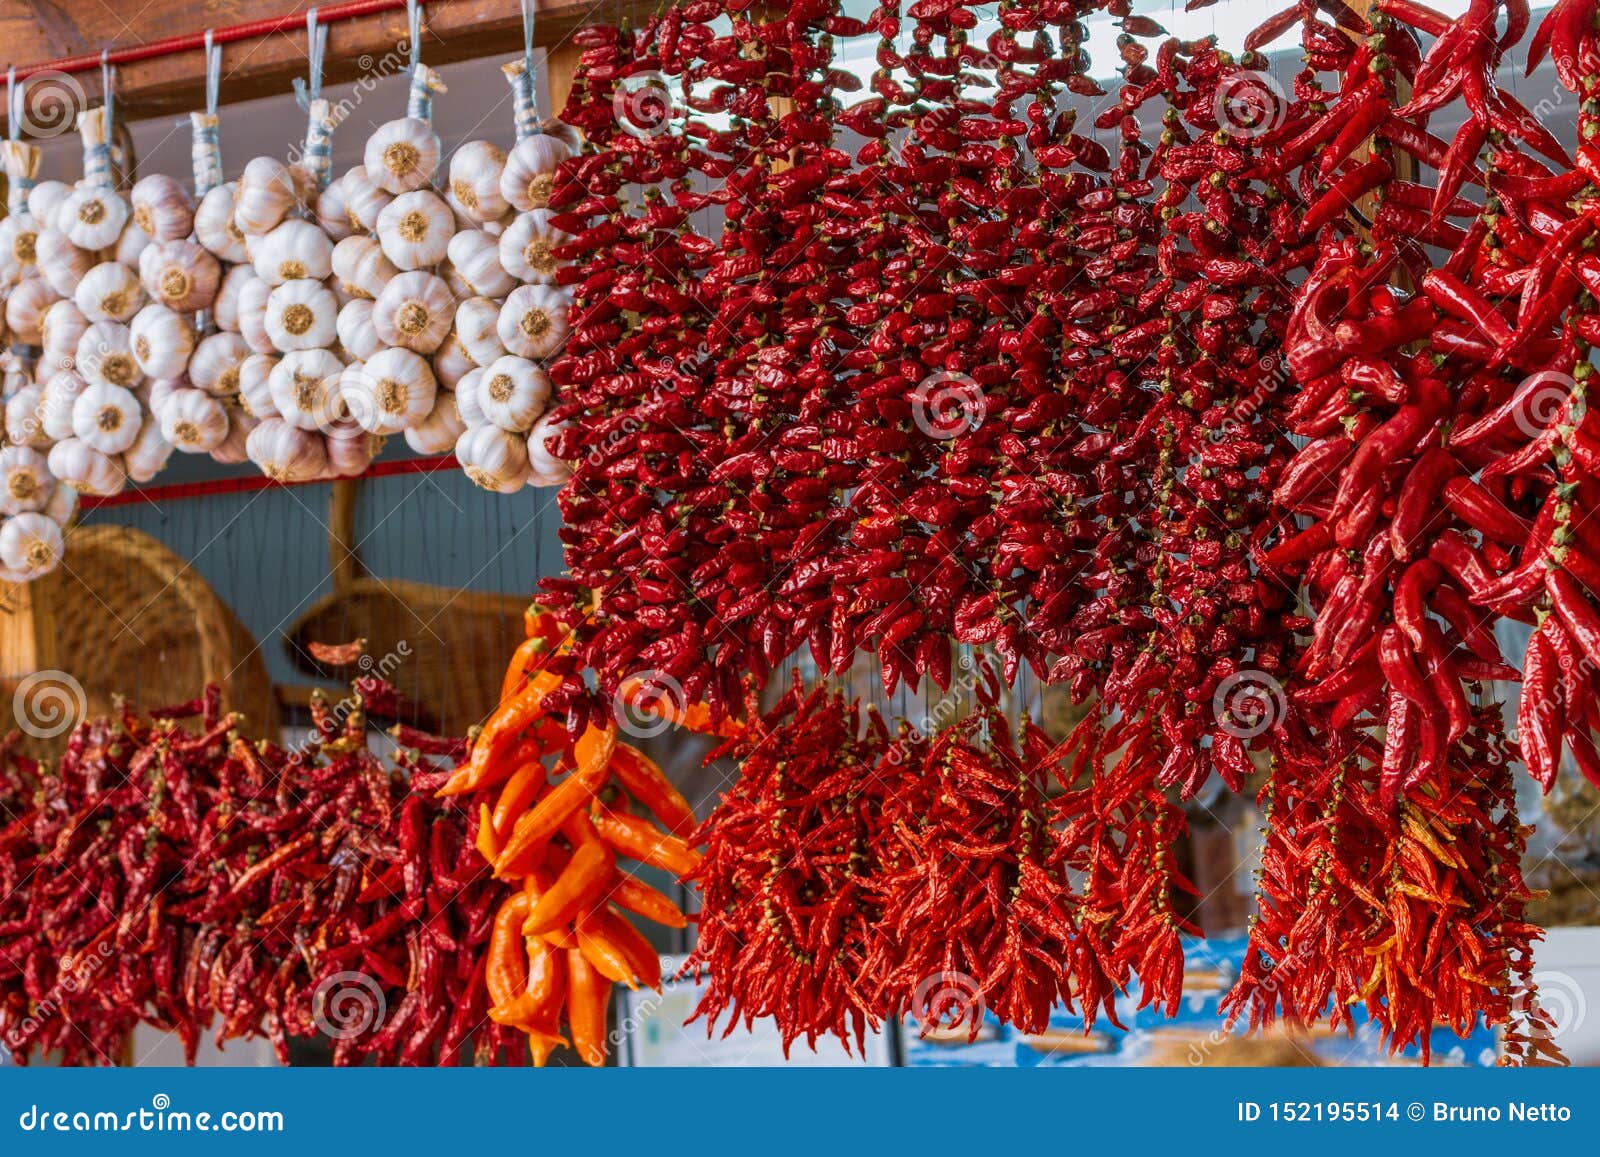 red peppers in a market stall.